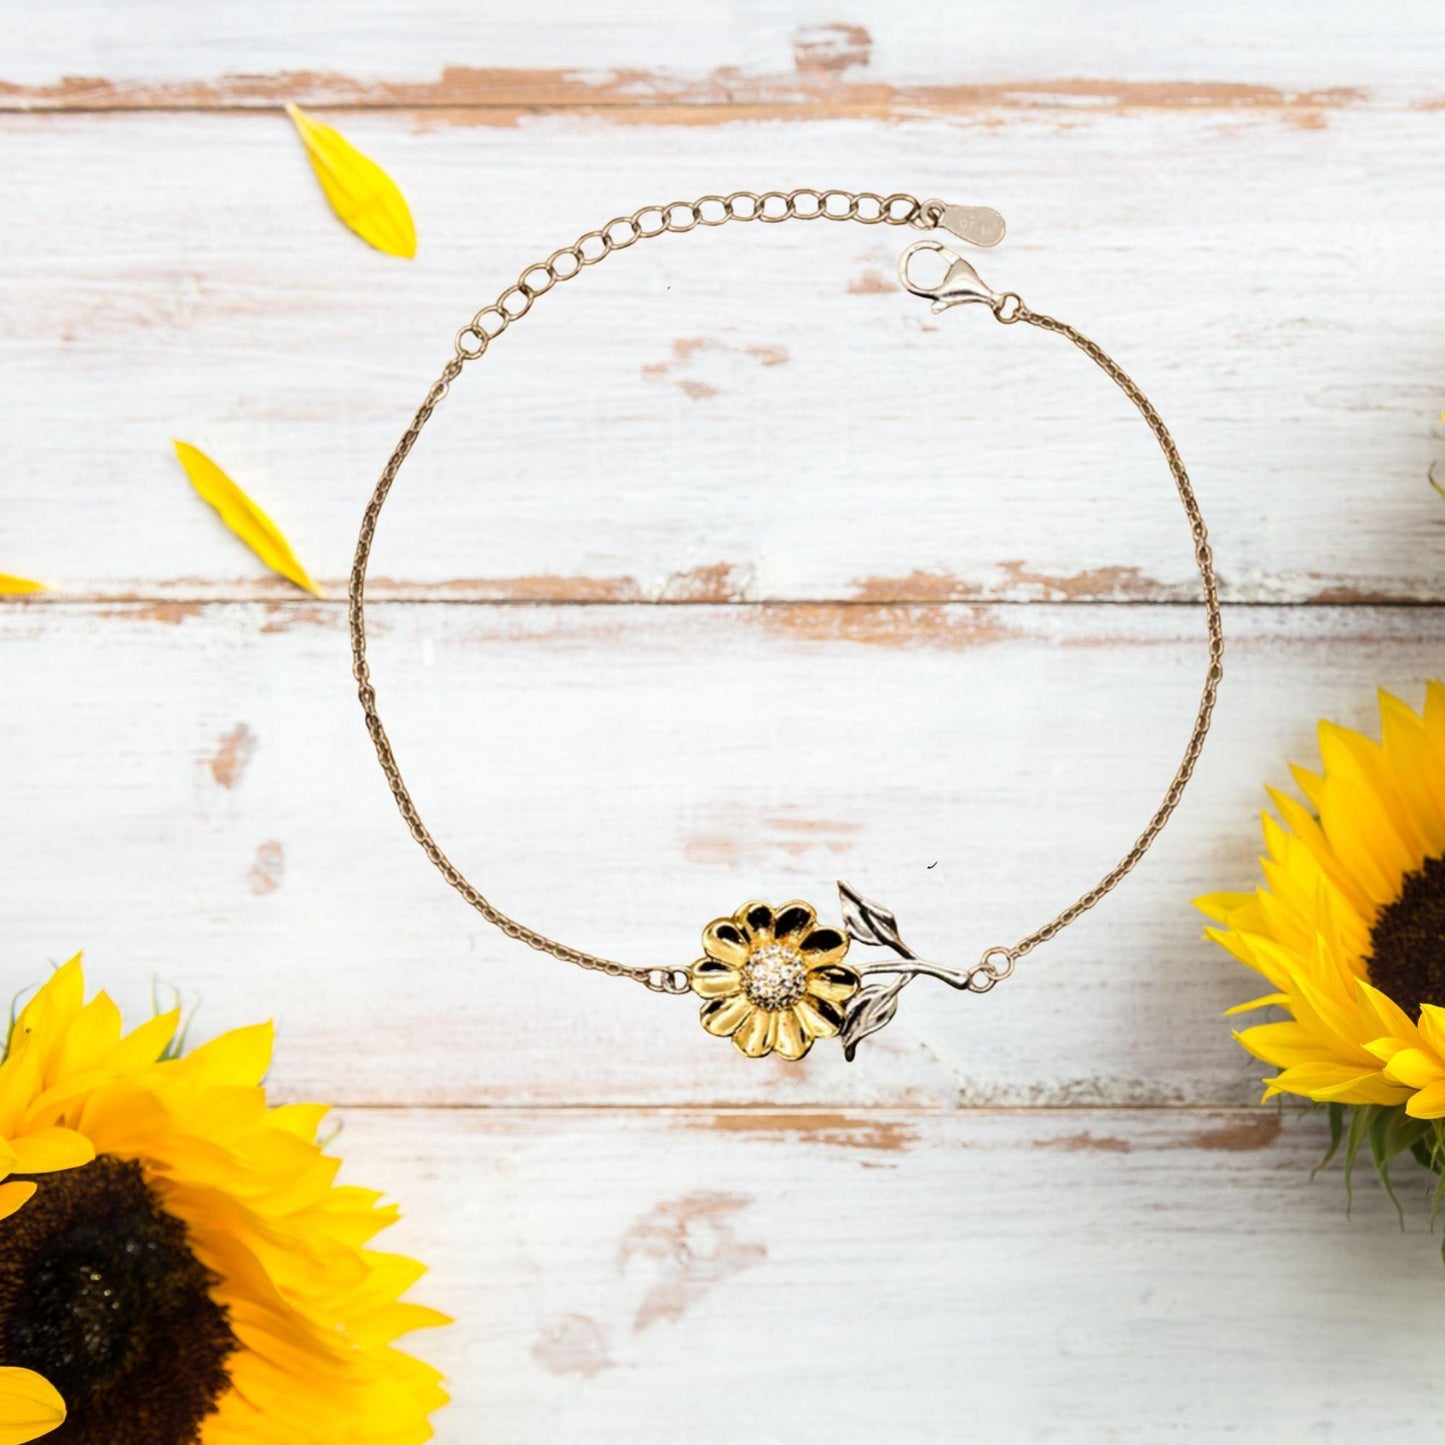 Brother In Law Gifts, To My Brother In Law Remember, you will never lose. You will either WIN or LEARN, Keepsake Sunflower Bracelet For Brother In Law Card, Birthday Christmas Gifts Ideas For Brother In Law X-mas Gifts